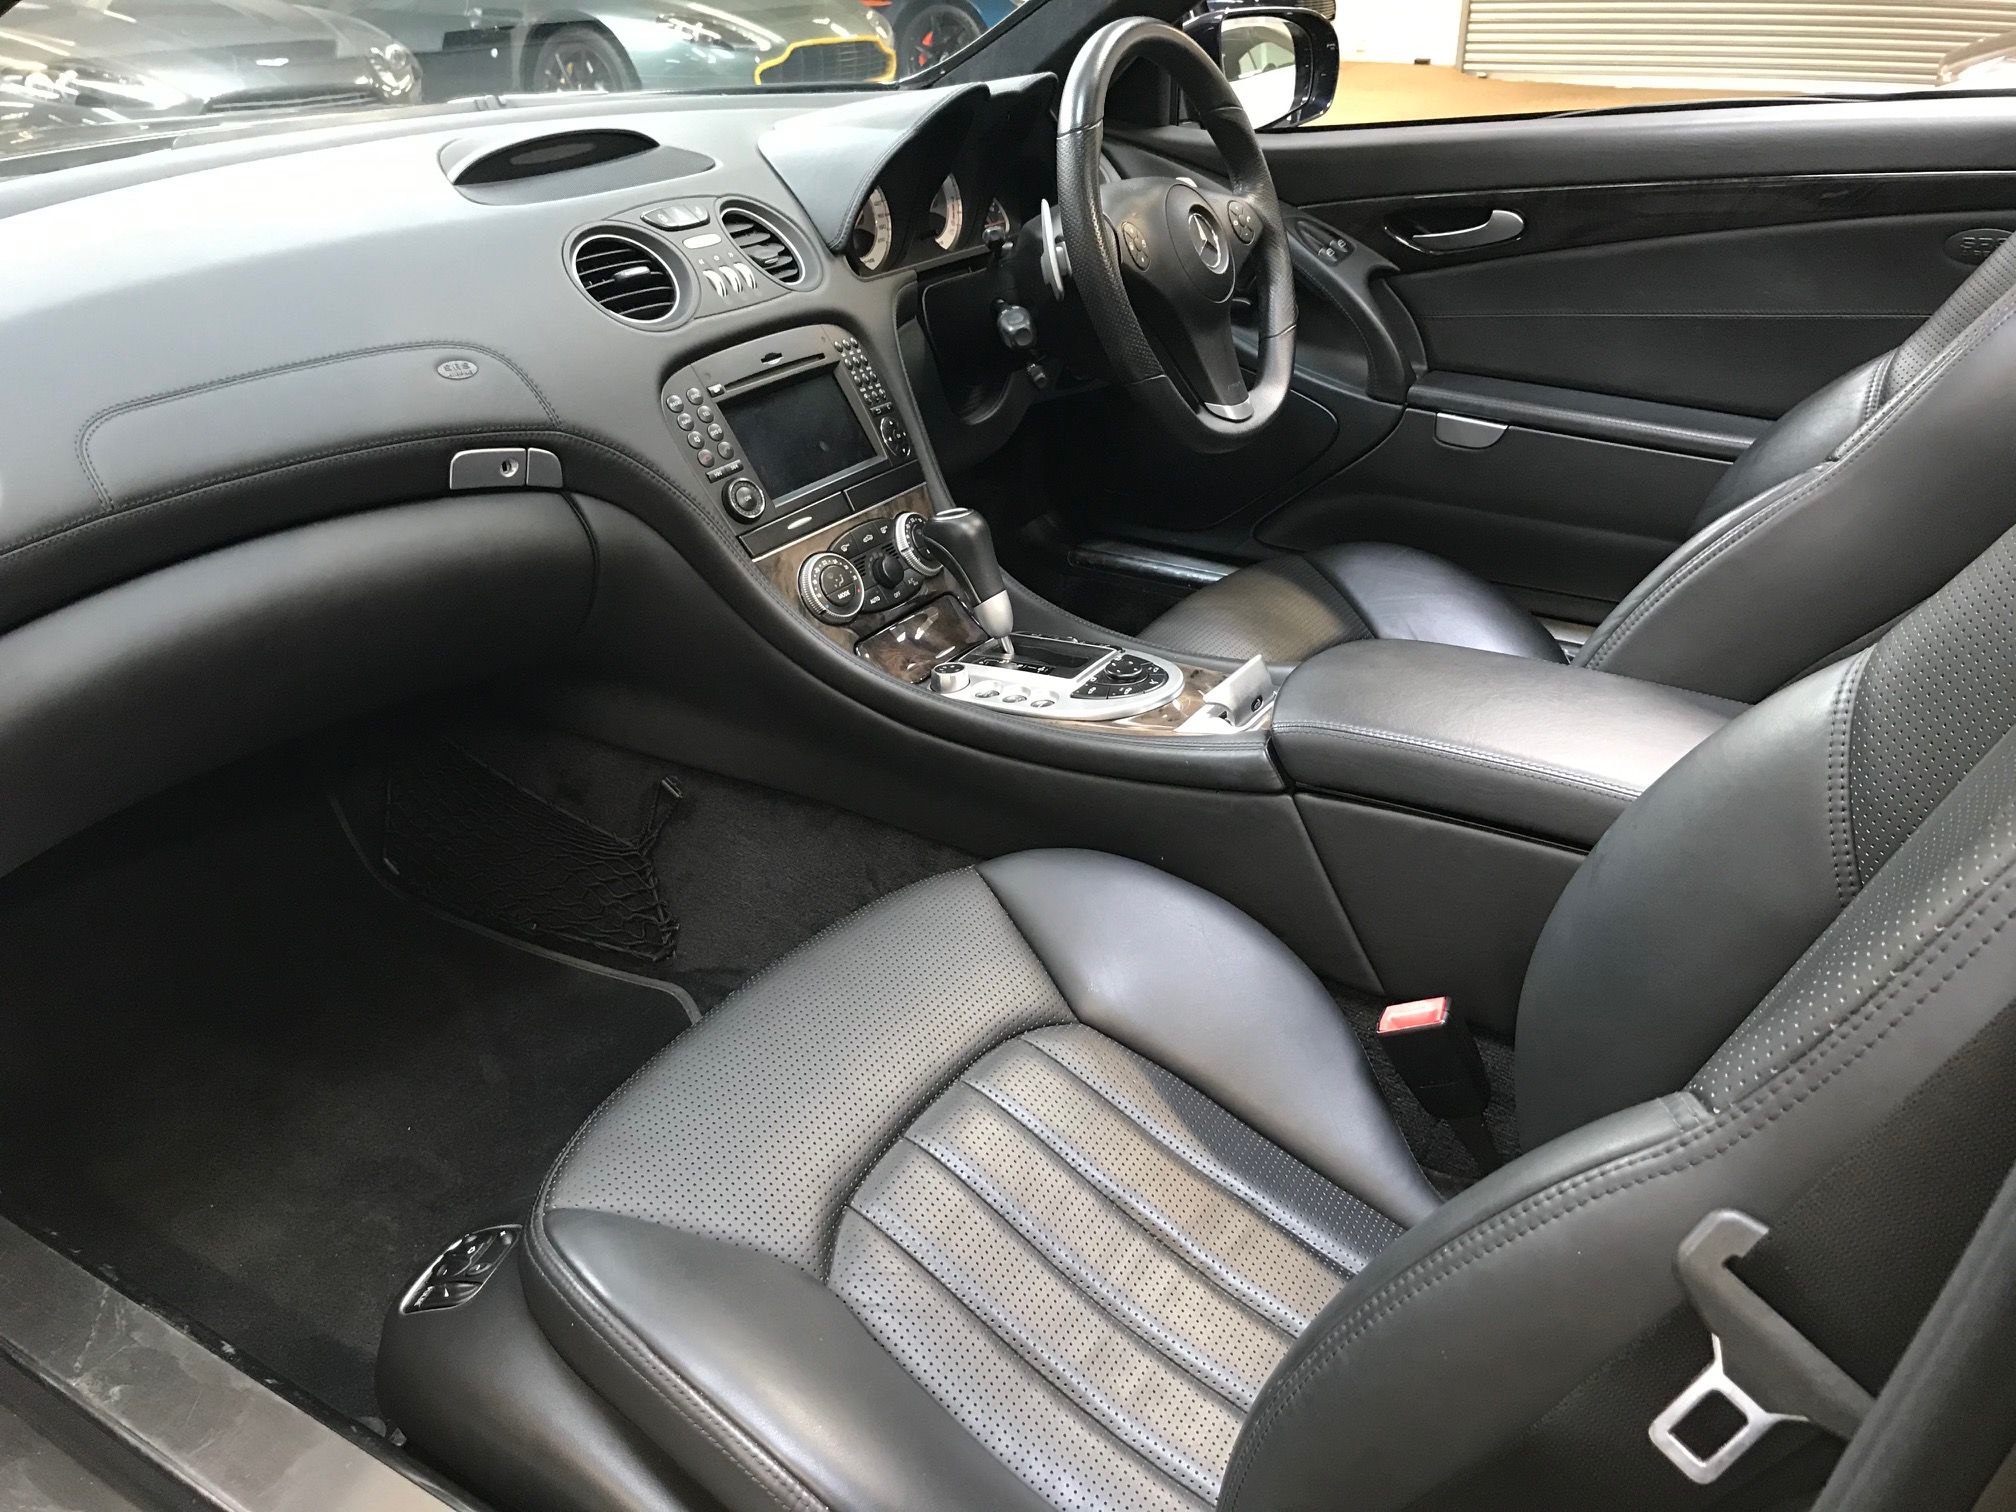 Used Mercedes SL63 For Sale